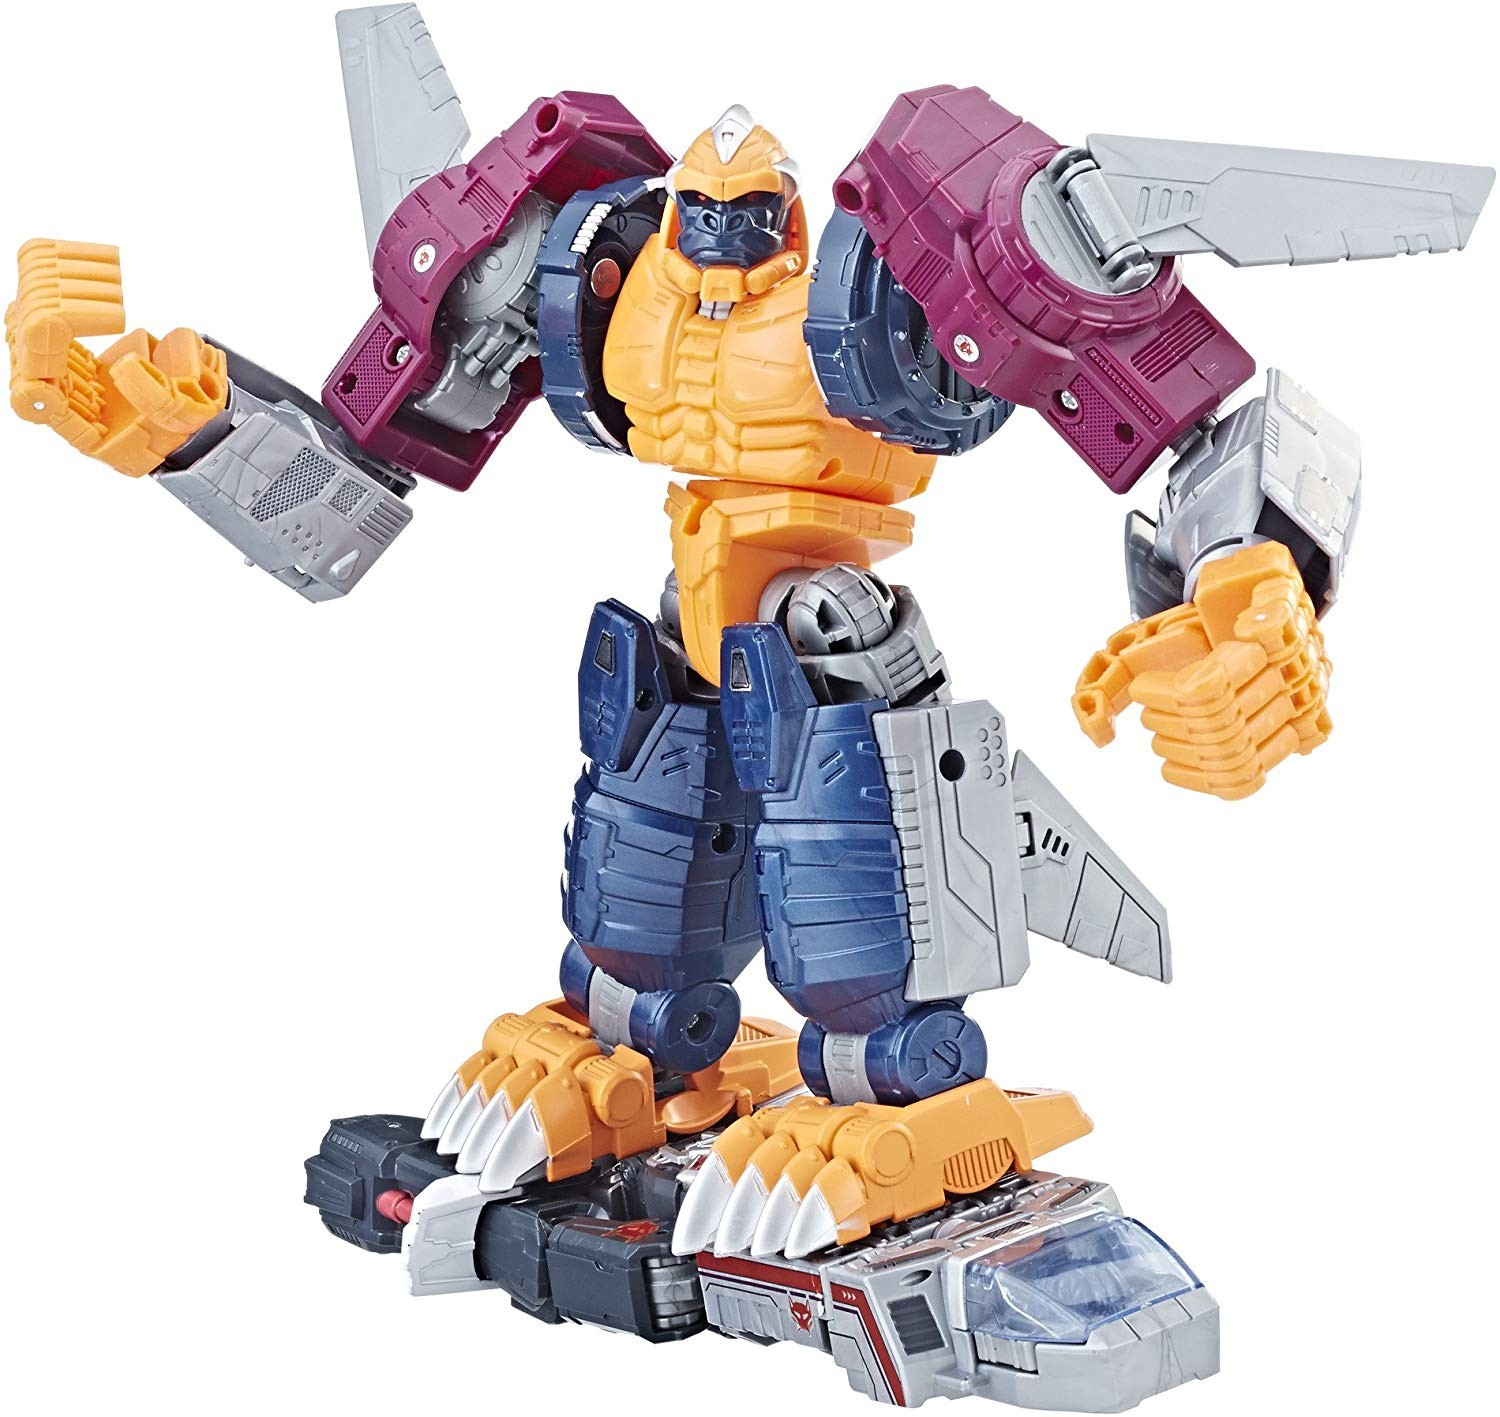 Transformers News: Transformers Power of the Primes Optimal Optimus now in stock at Hasbro Toy Shop and at Amazon.com